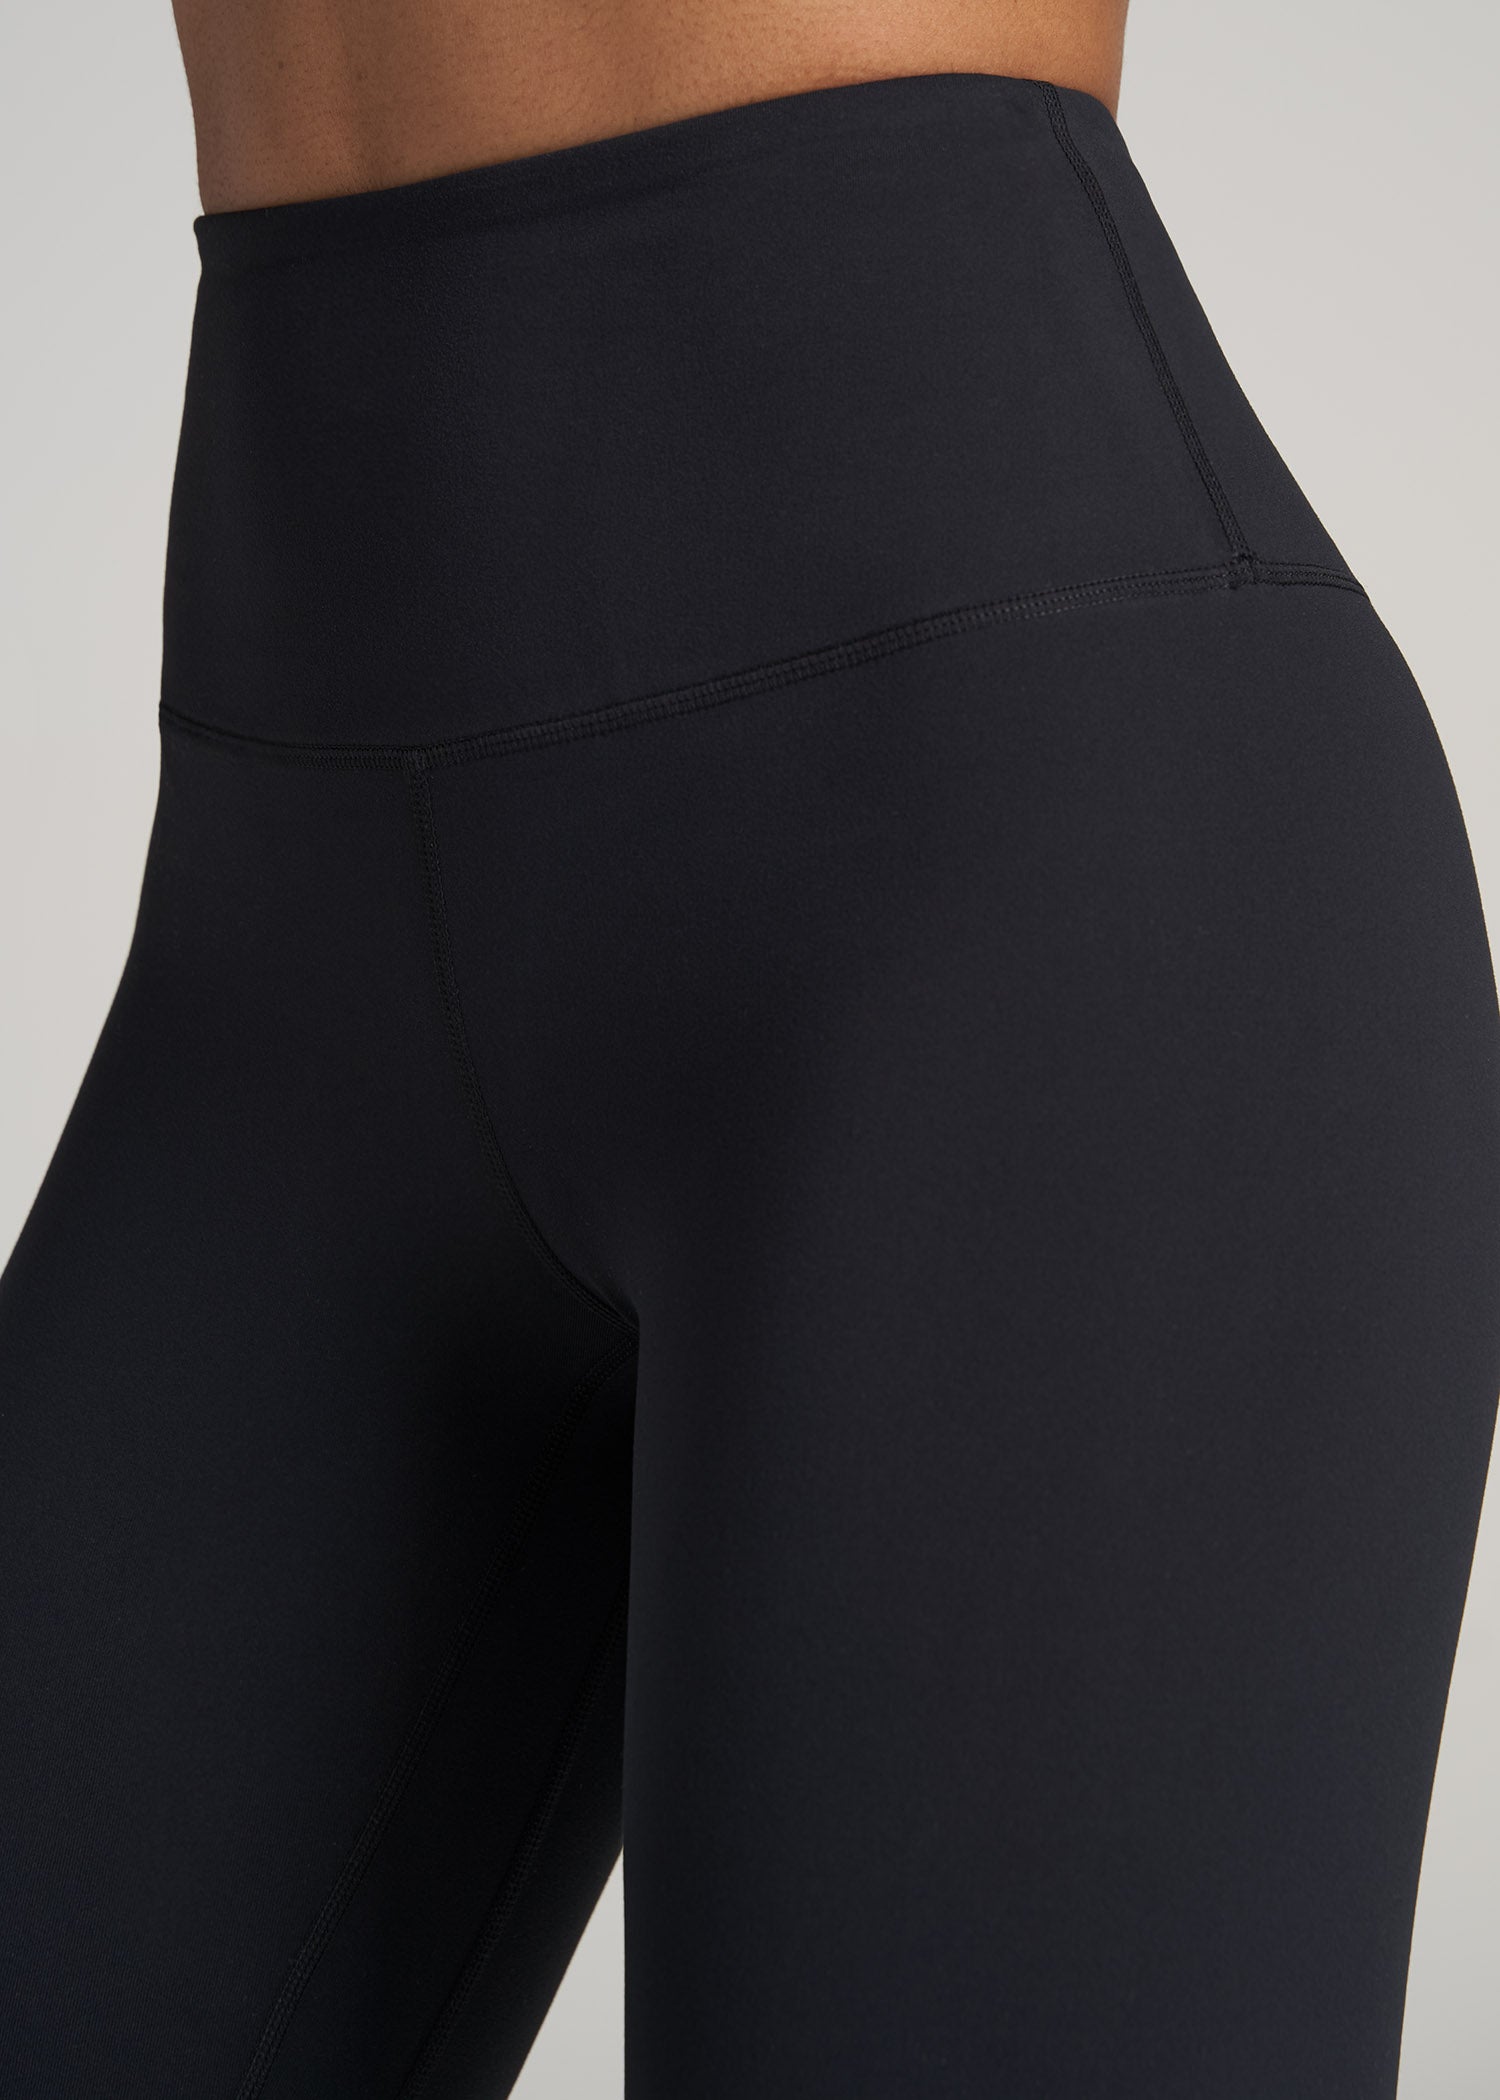 AT Balance High-Rise Leggings for Tall Women in Bright Navy